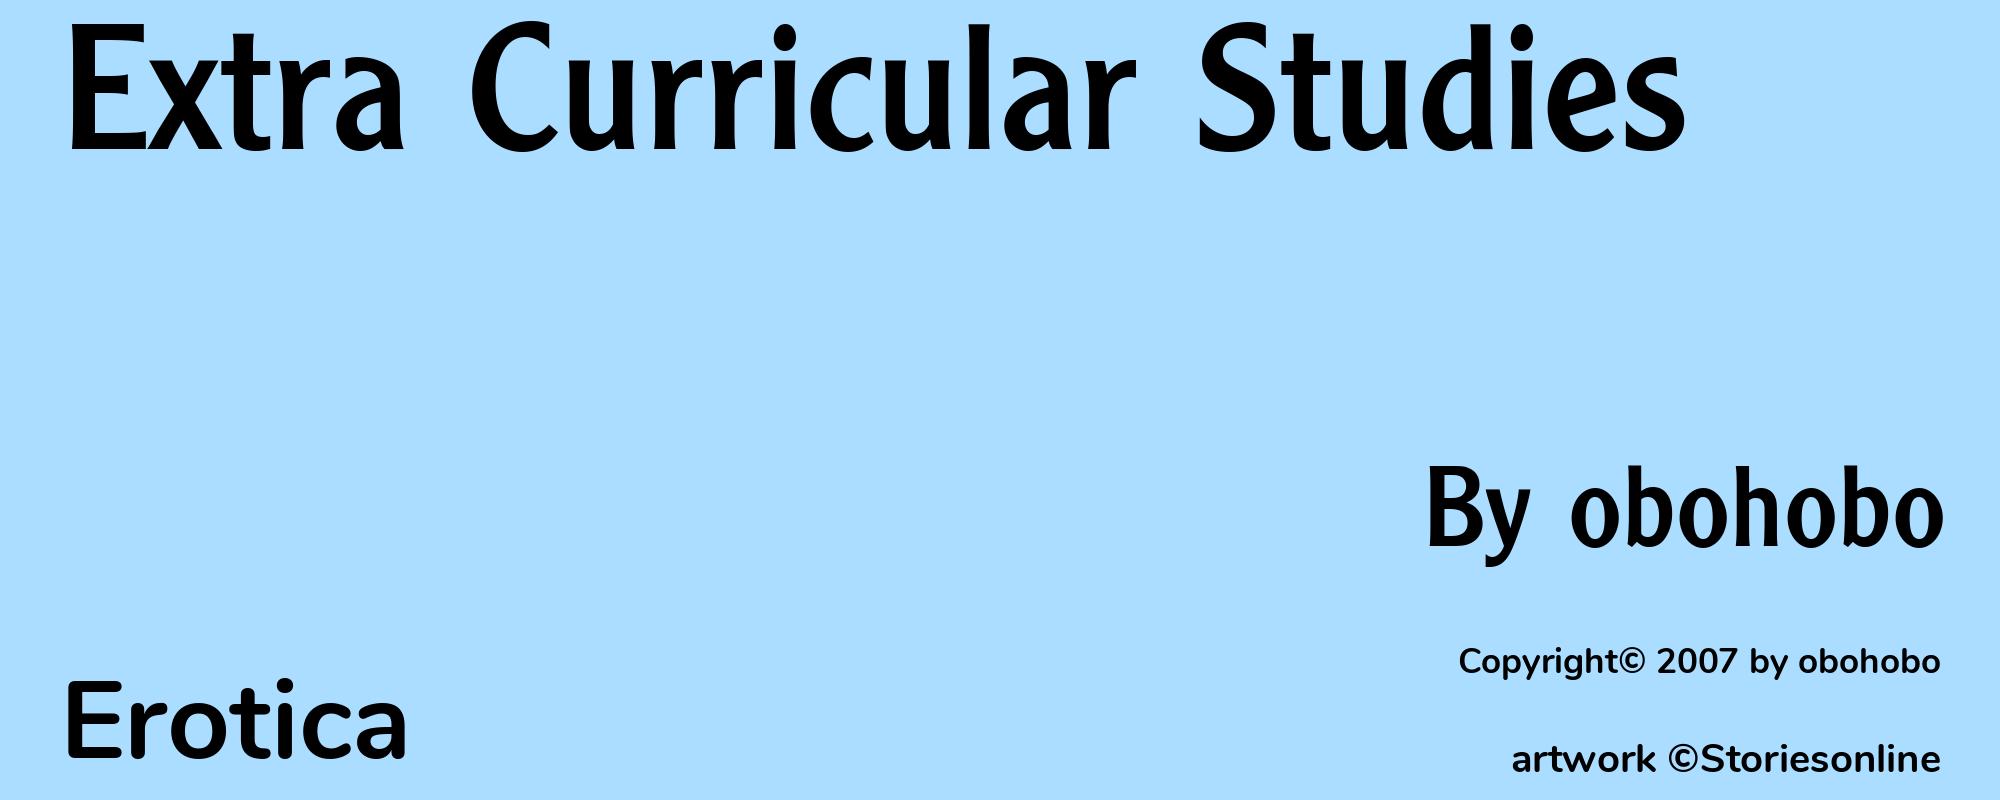 Extra Curricular Studies - Cover